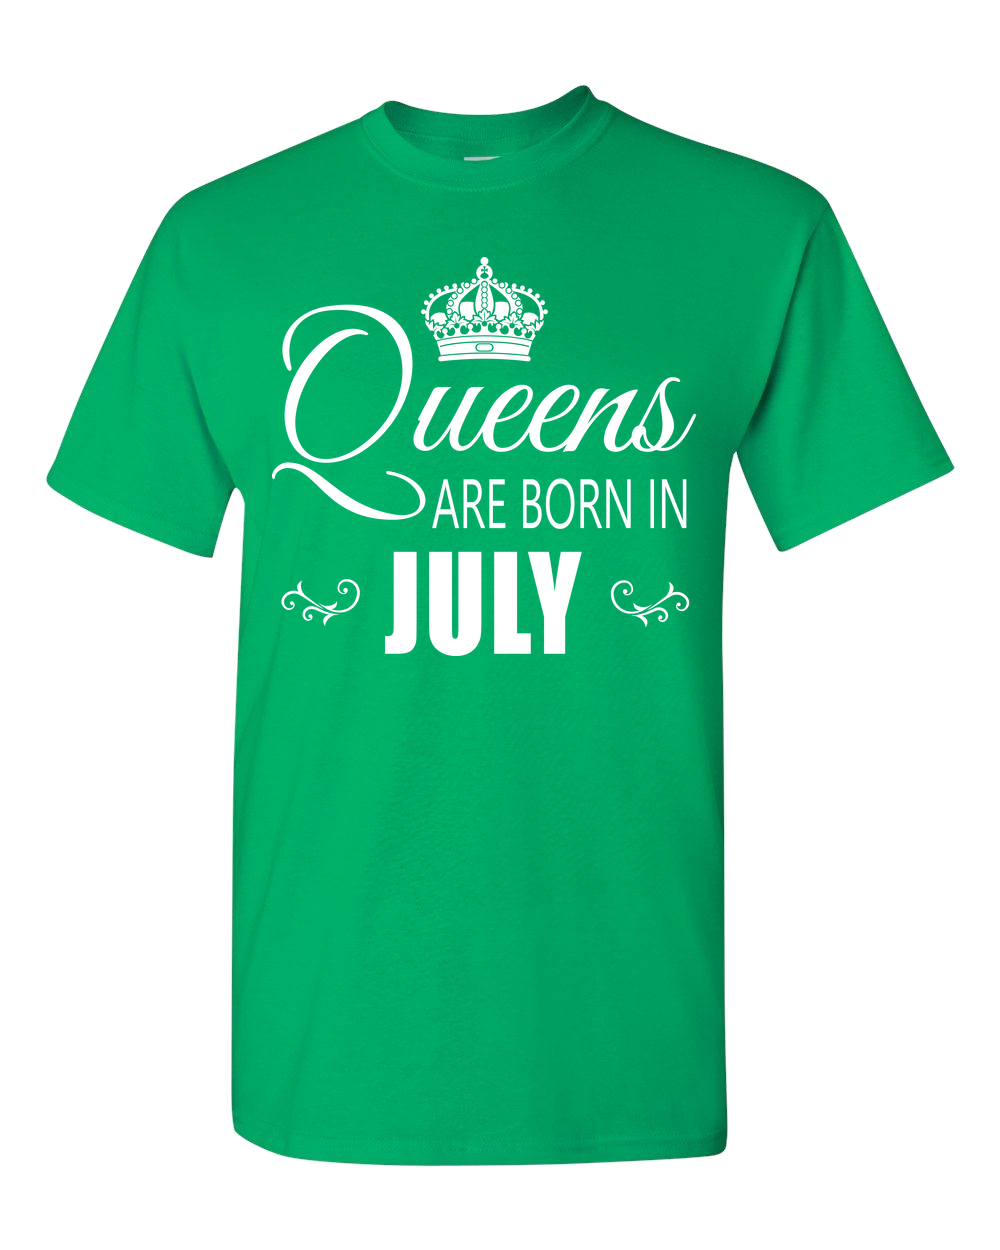 Queens are born in July _T-Shirt_840 - JaZazzy 